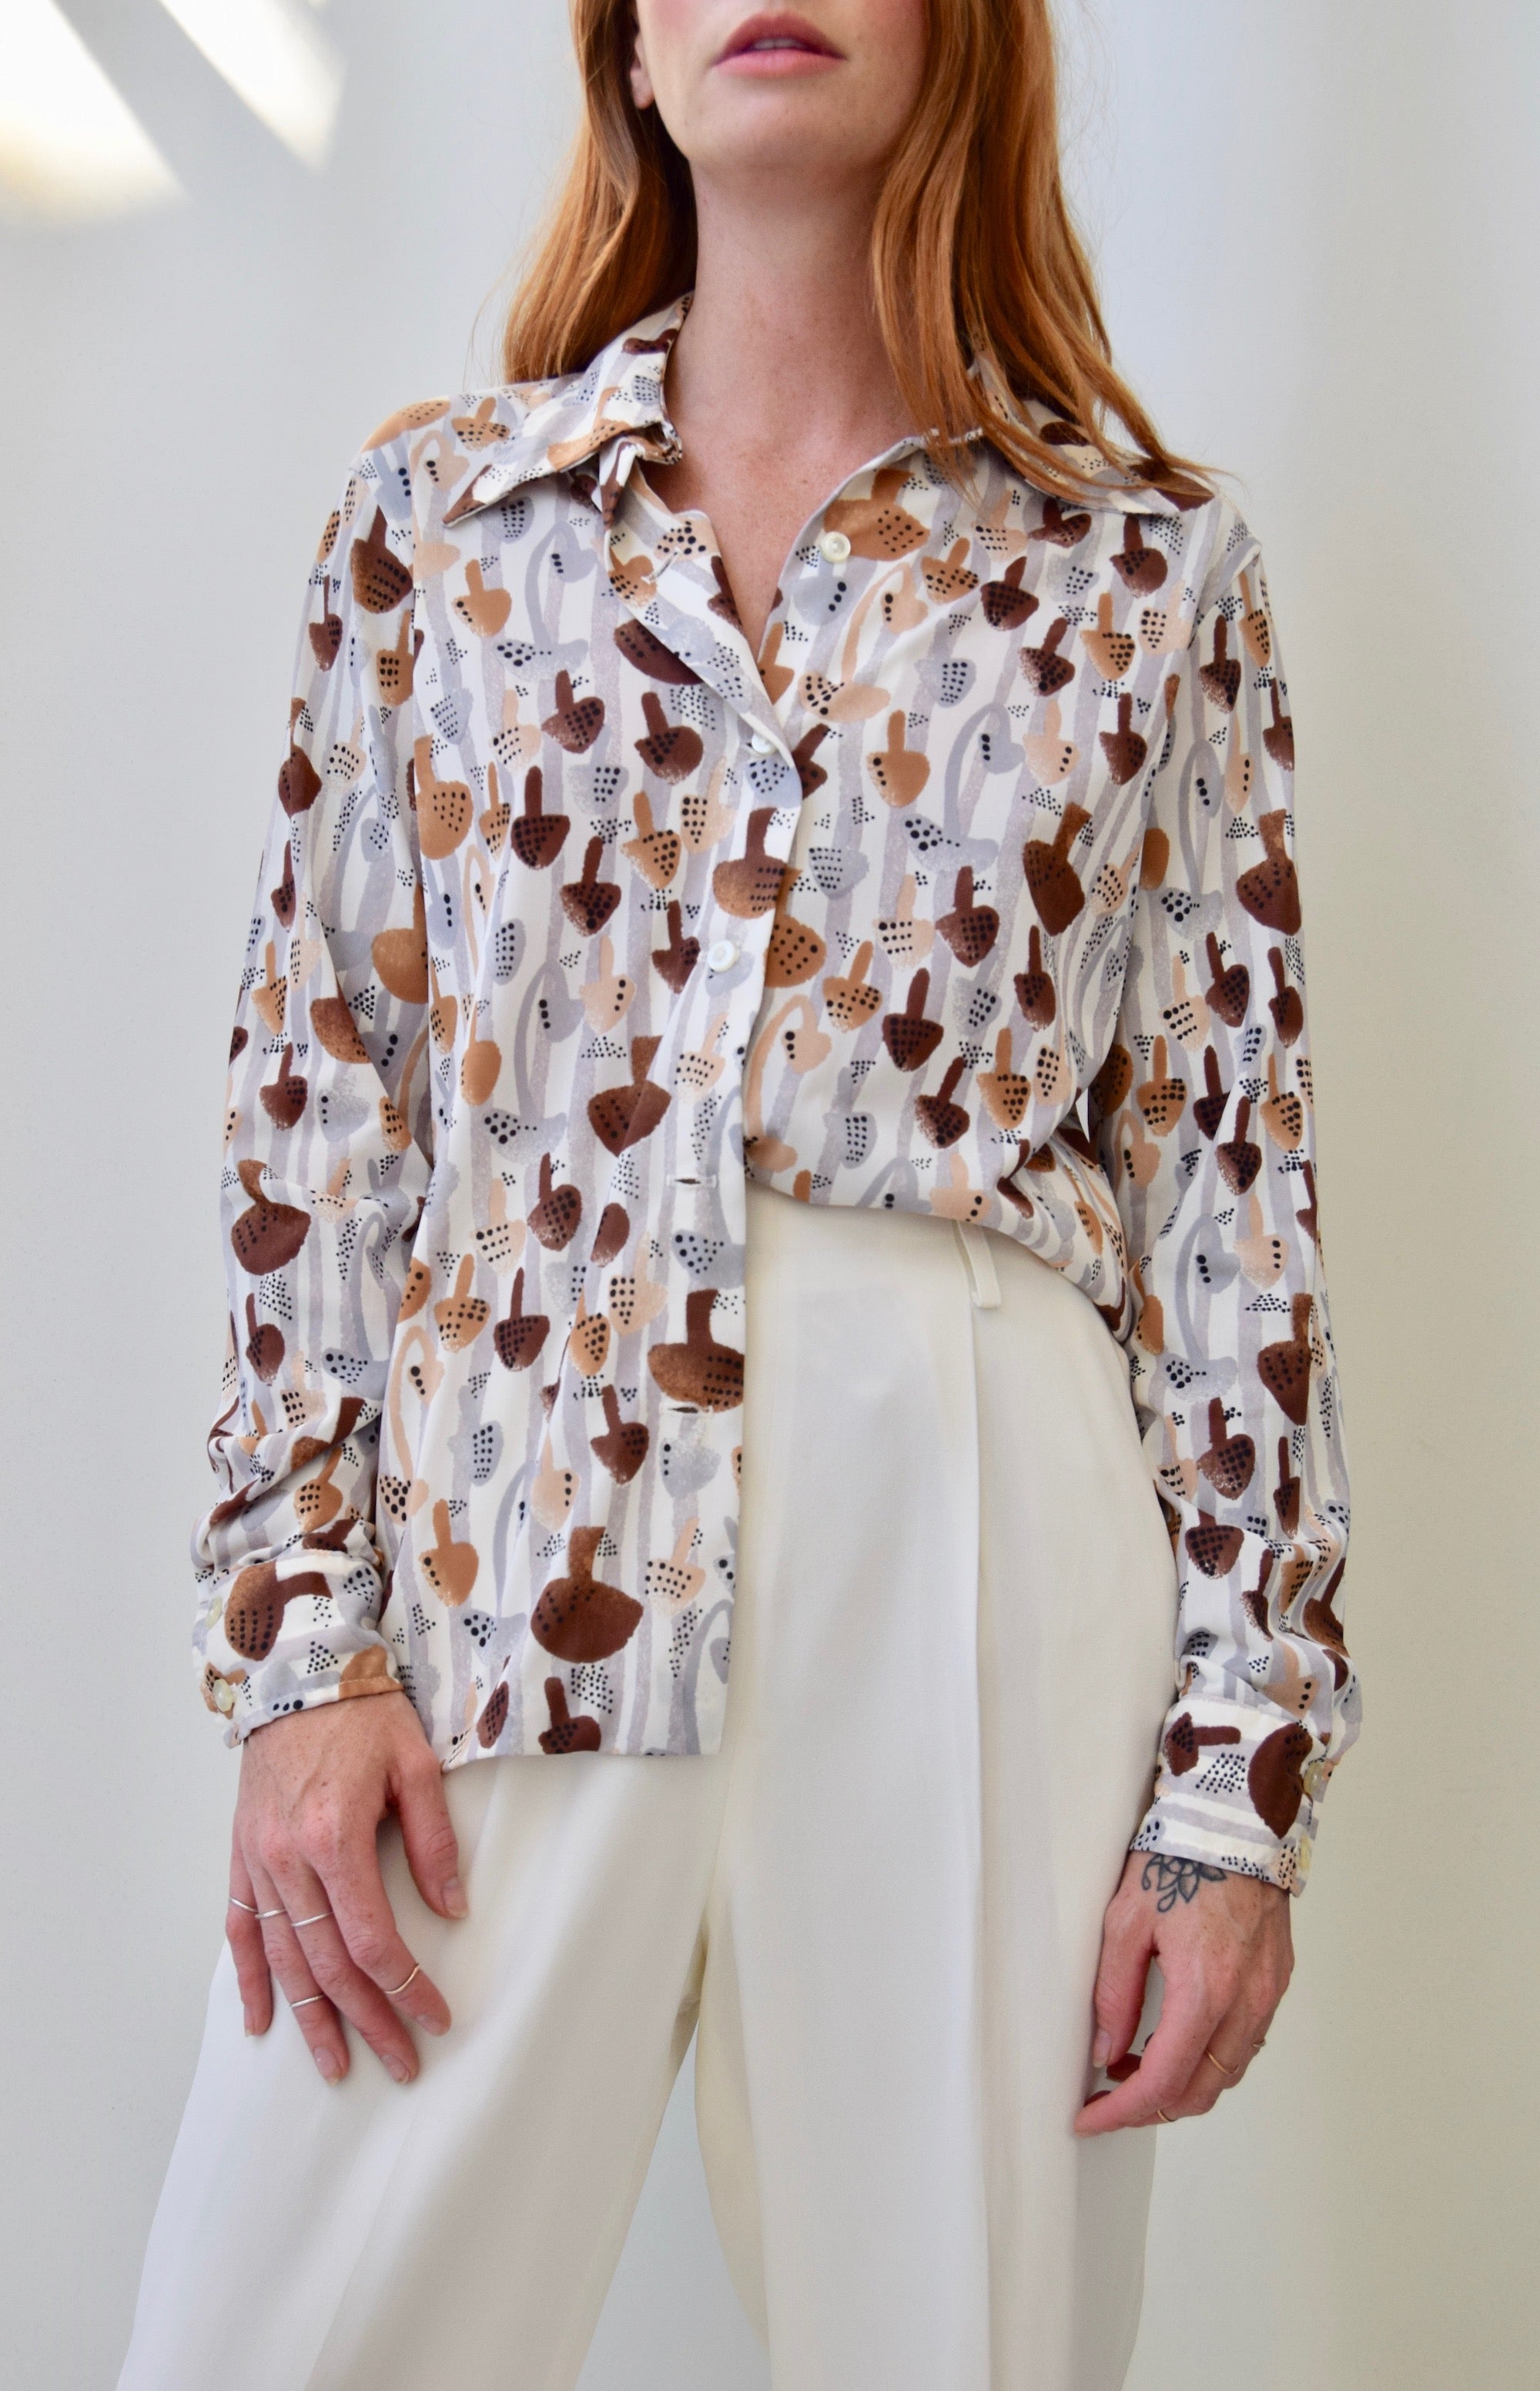 Seventies "PS I Love You" Muted Mushroom Top